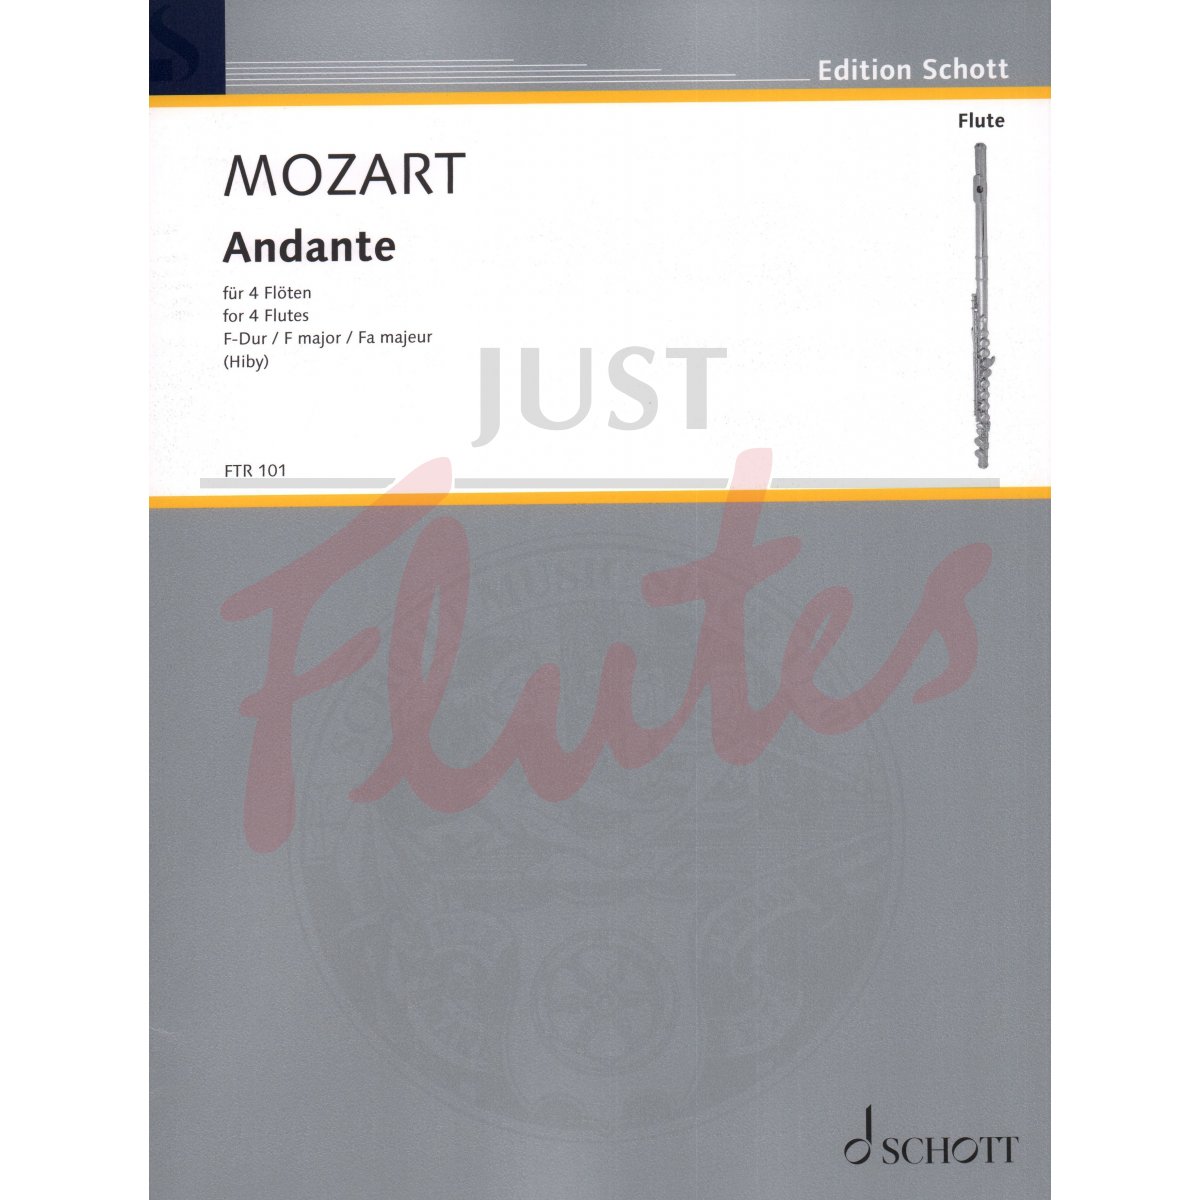 Andante in F major for Four Flutes